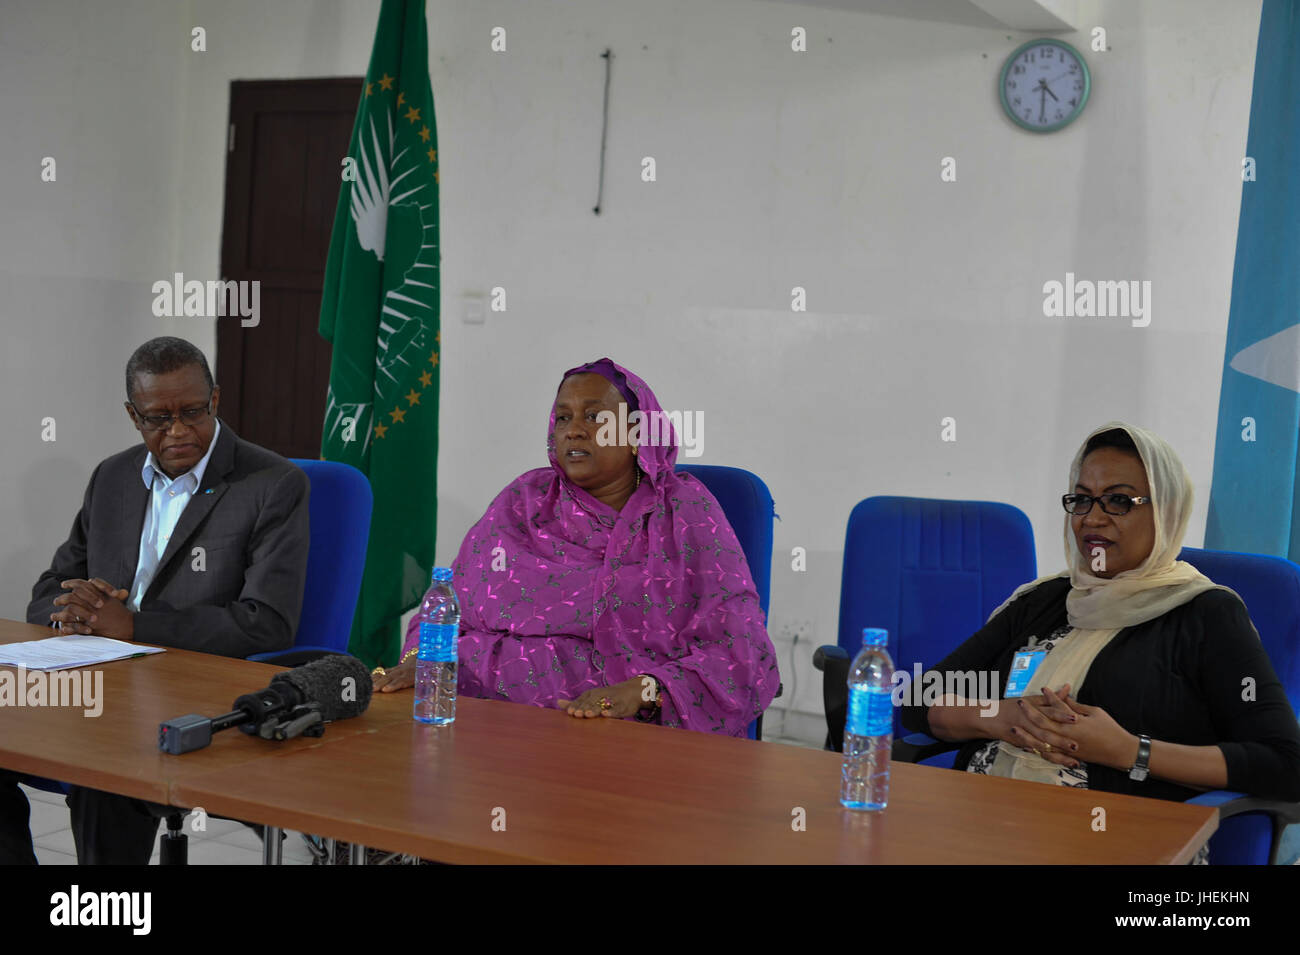 2015 03 07 AMISOM Hands over women's day materials to FGS-7 (16556309790) Stock Photo